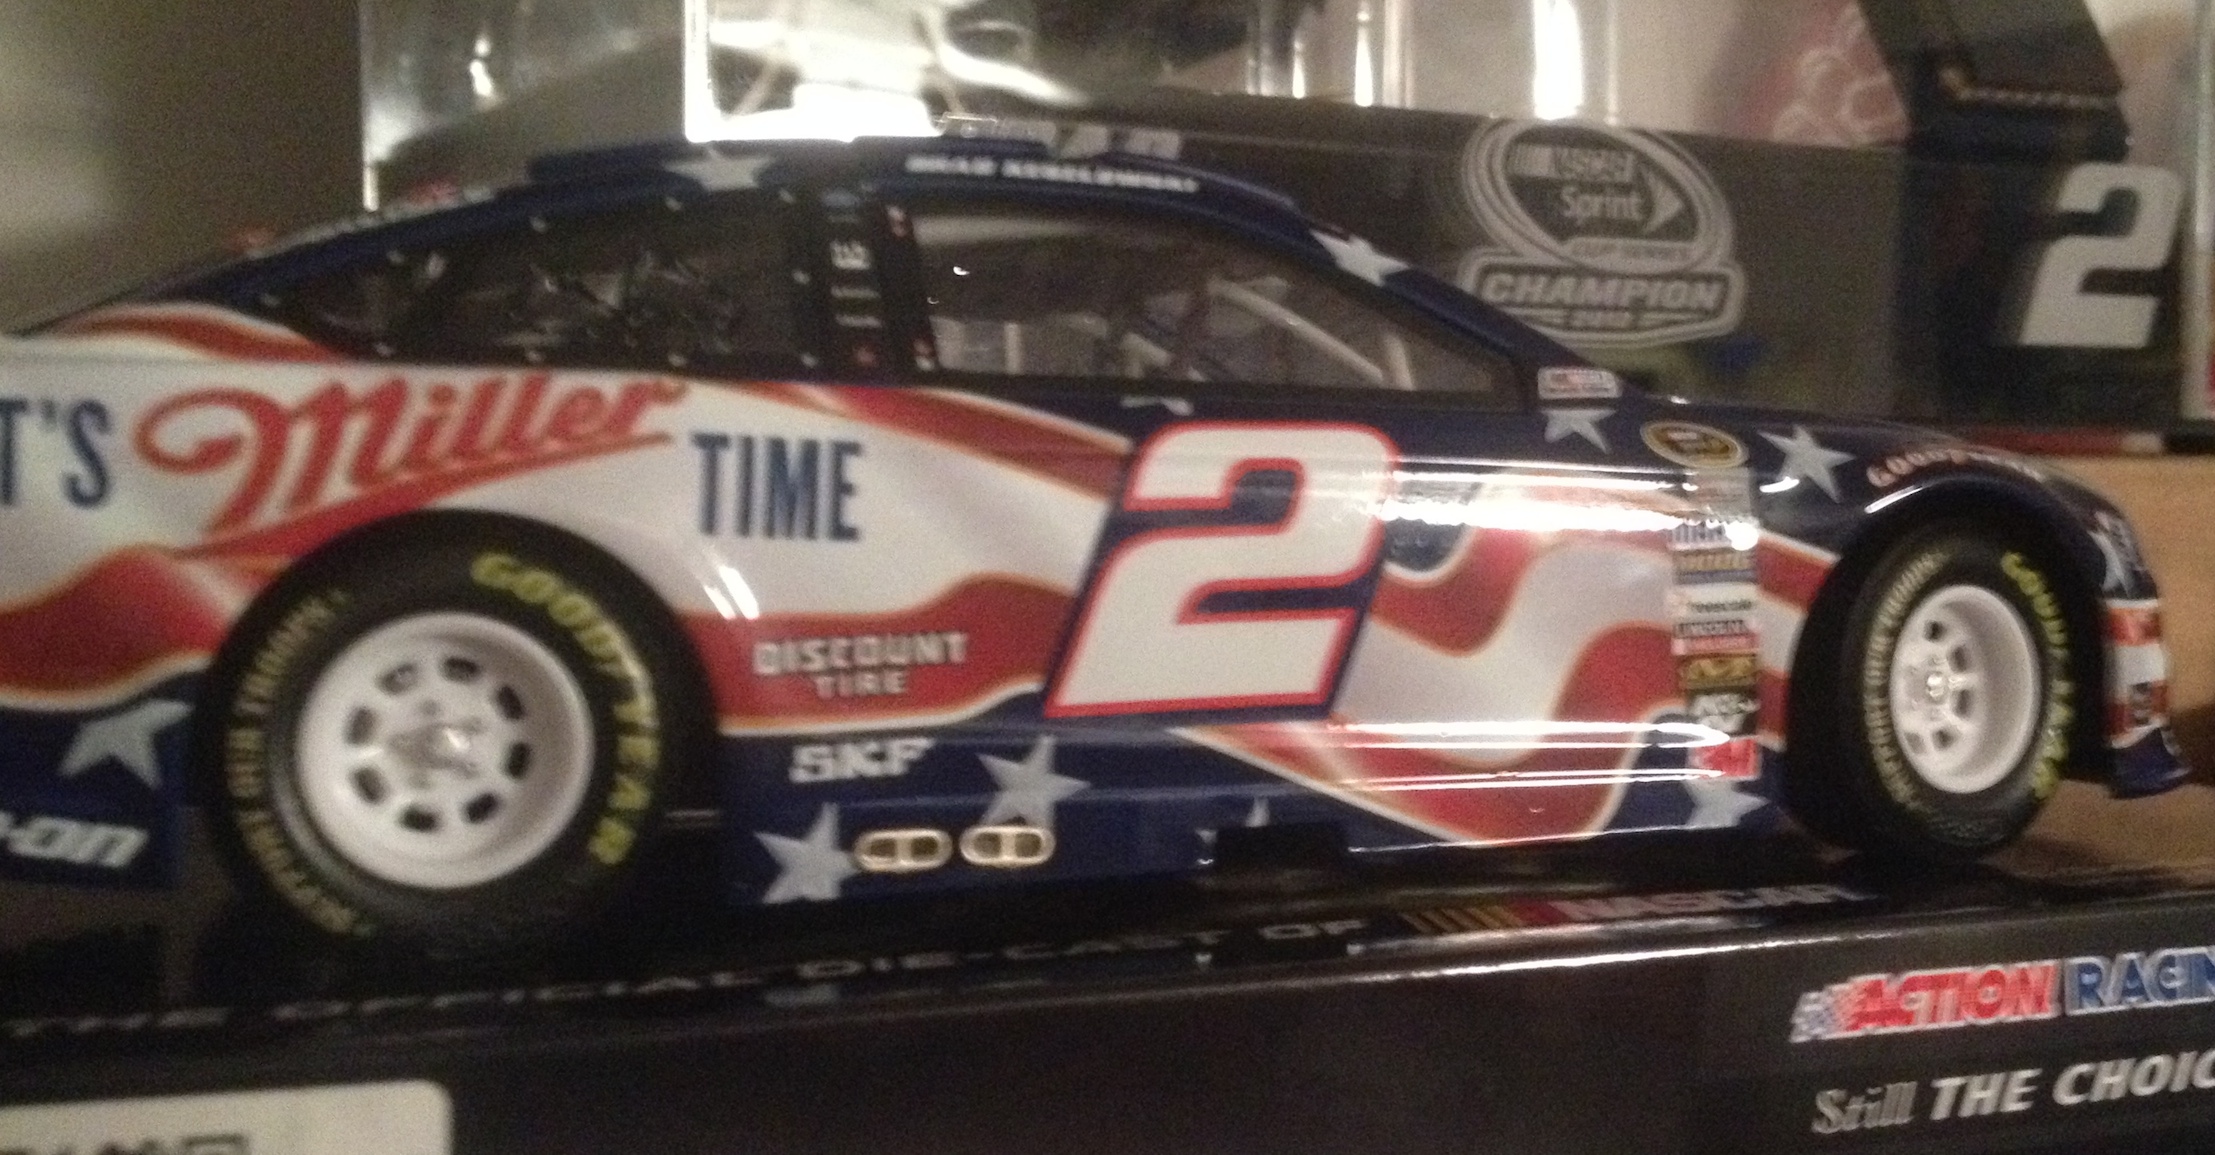 The 2013 Salute scheme, one of my favorites!